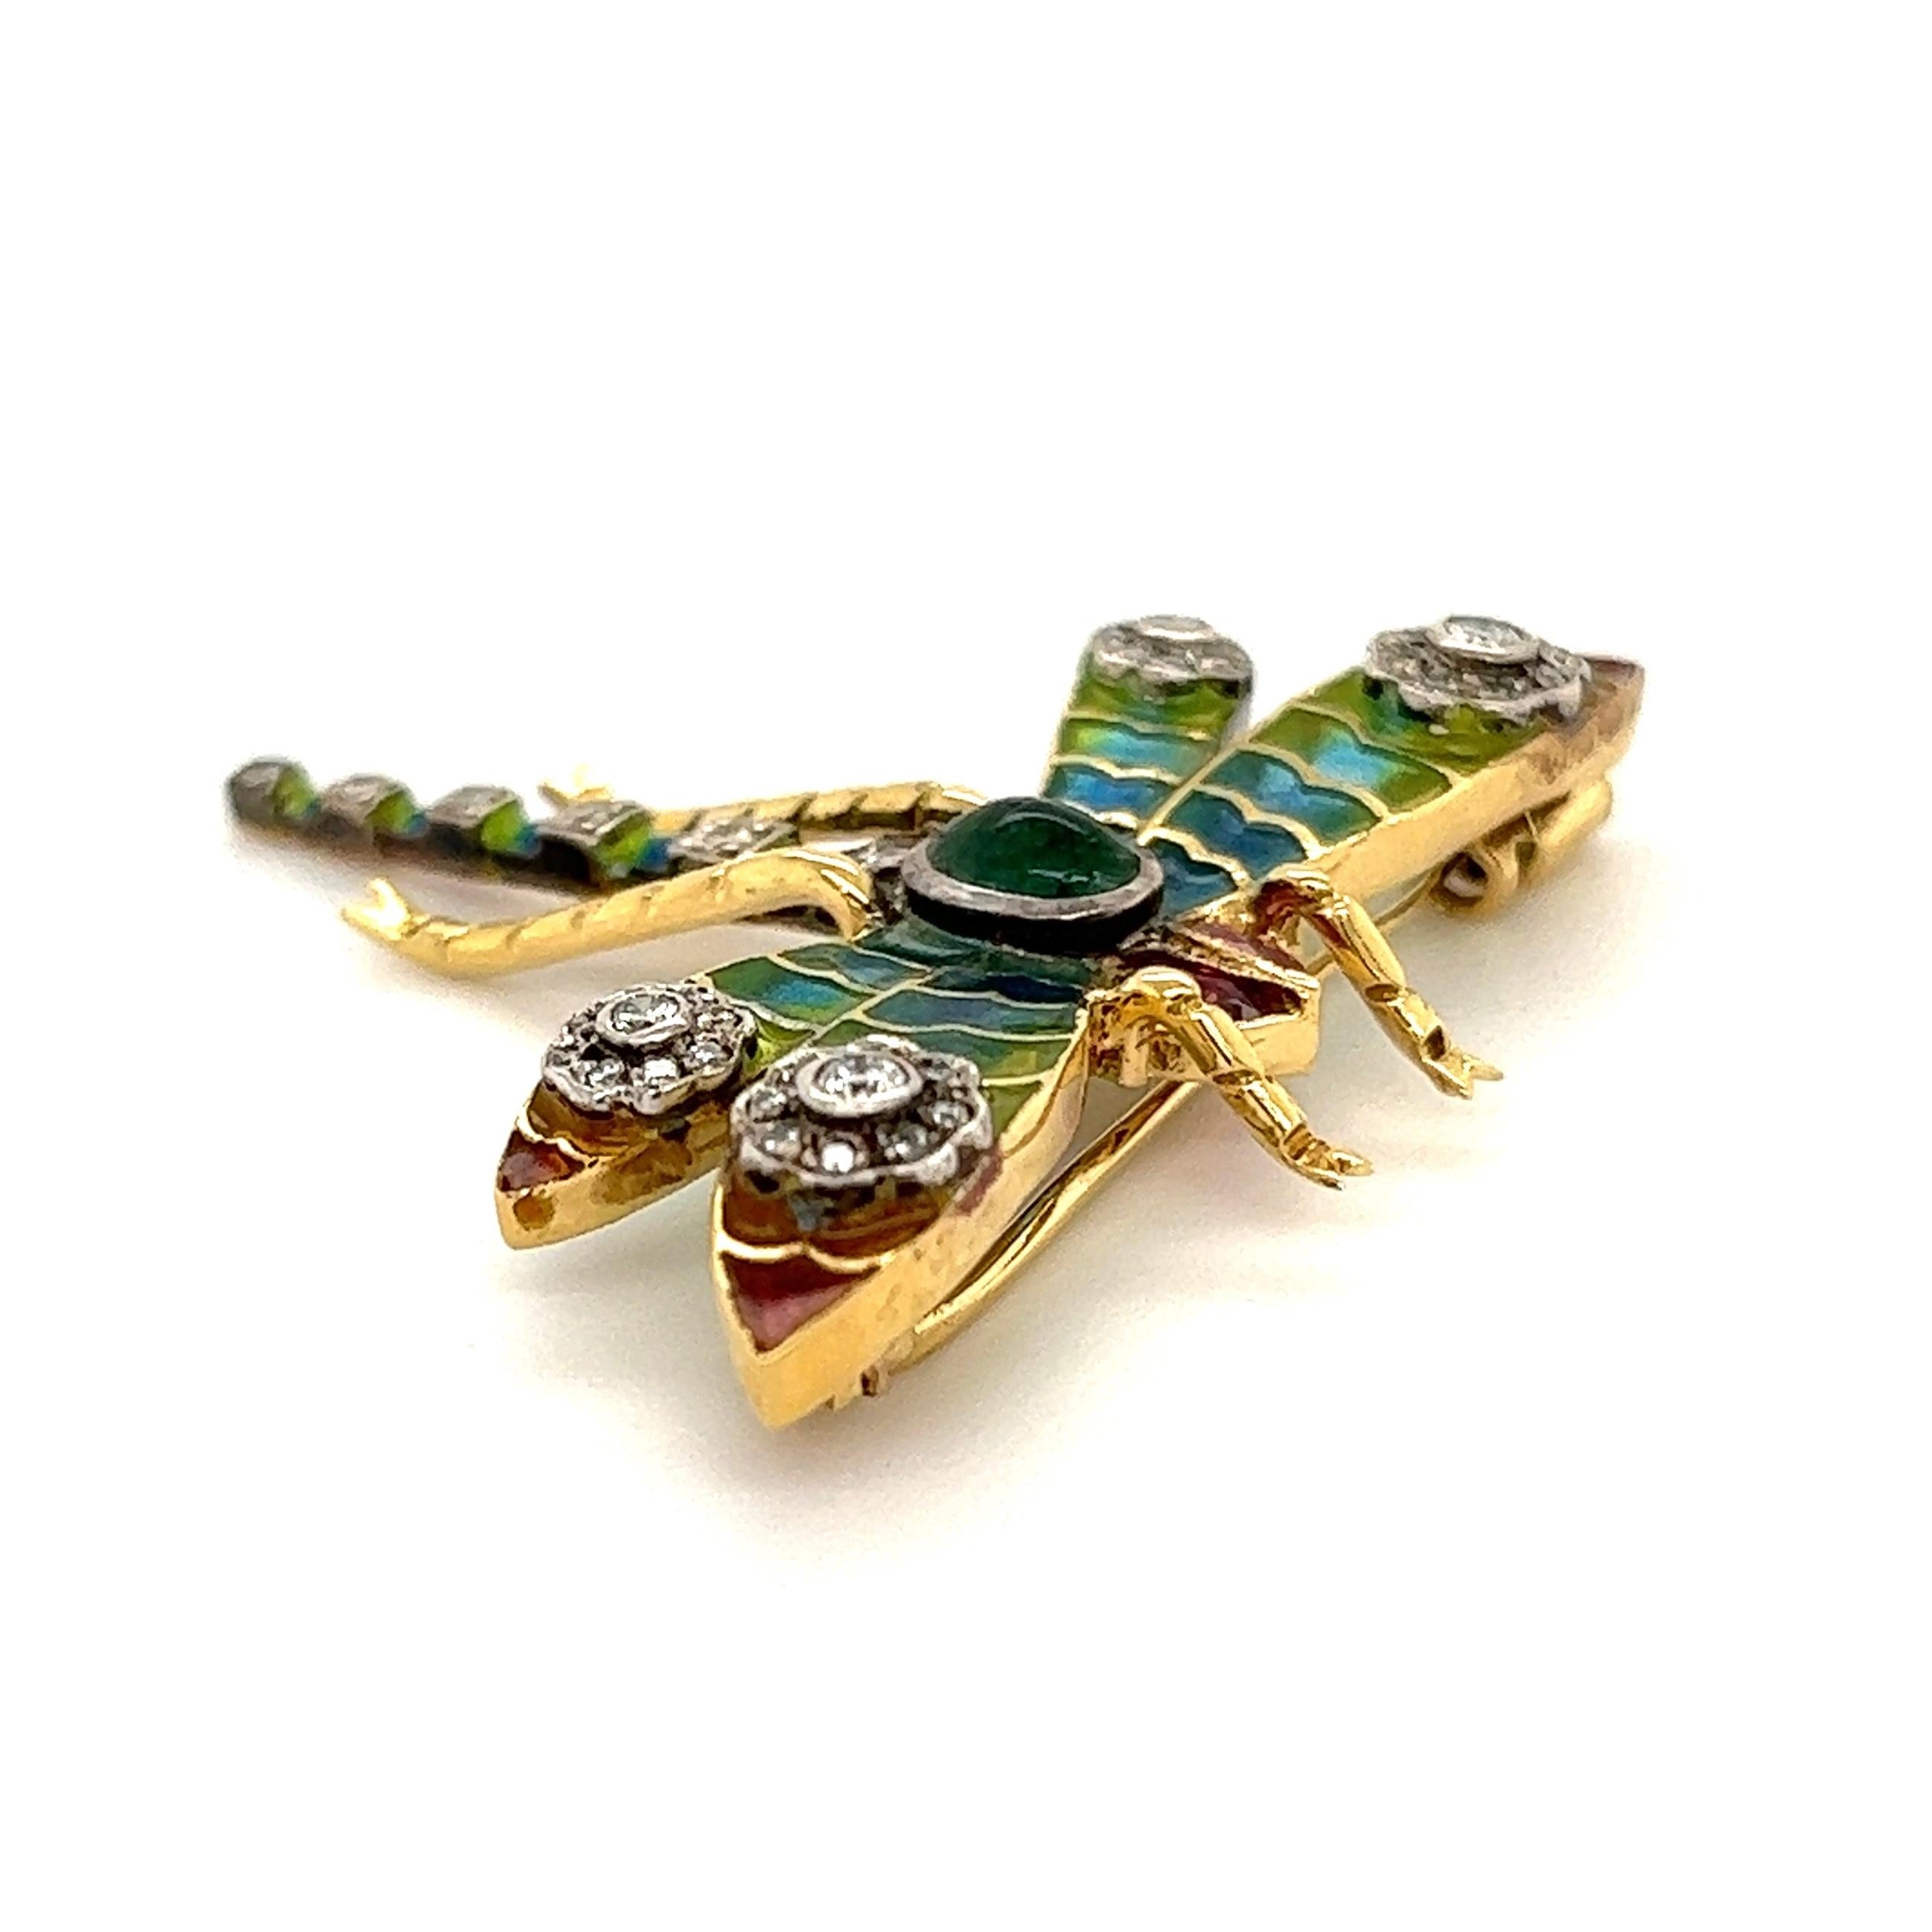 Simply Beautiful! Plique-à-Jour Dragonfly Brooch with Blue, Green and Red Enamel Wings, Hand set with Rubies, approx. 0.30tcw, Emeralds 0.25ct and Diamonds, approx. 0.32tcw. Hand crafted in 18 Karat Yellow Gold. Approx. size: 1.75” tall. This pin is